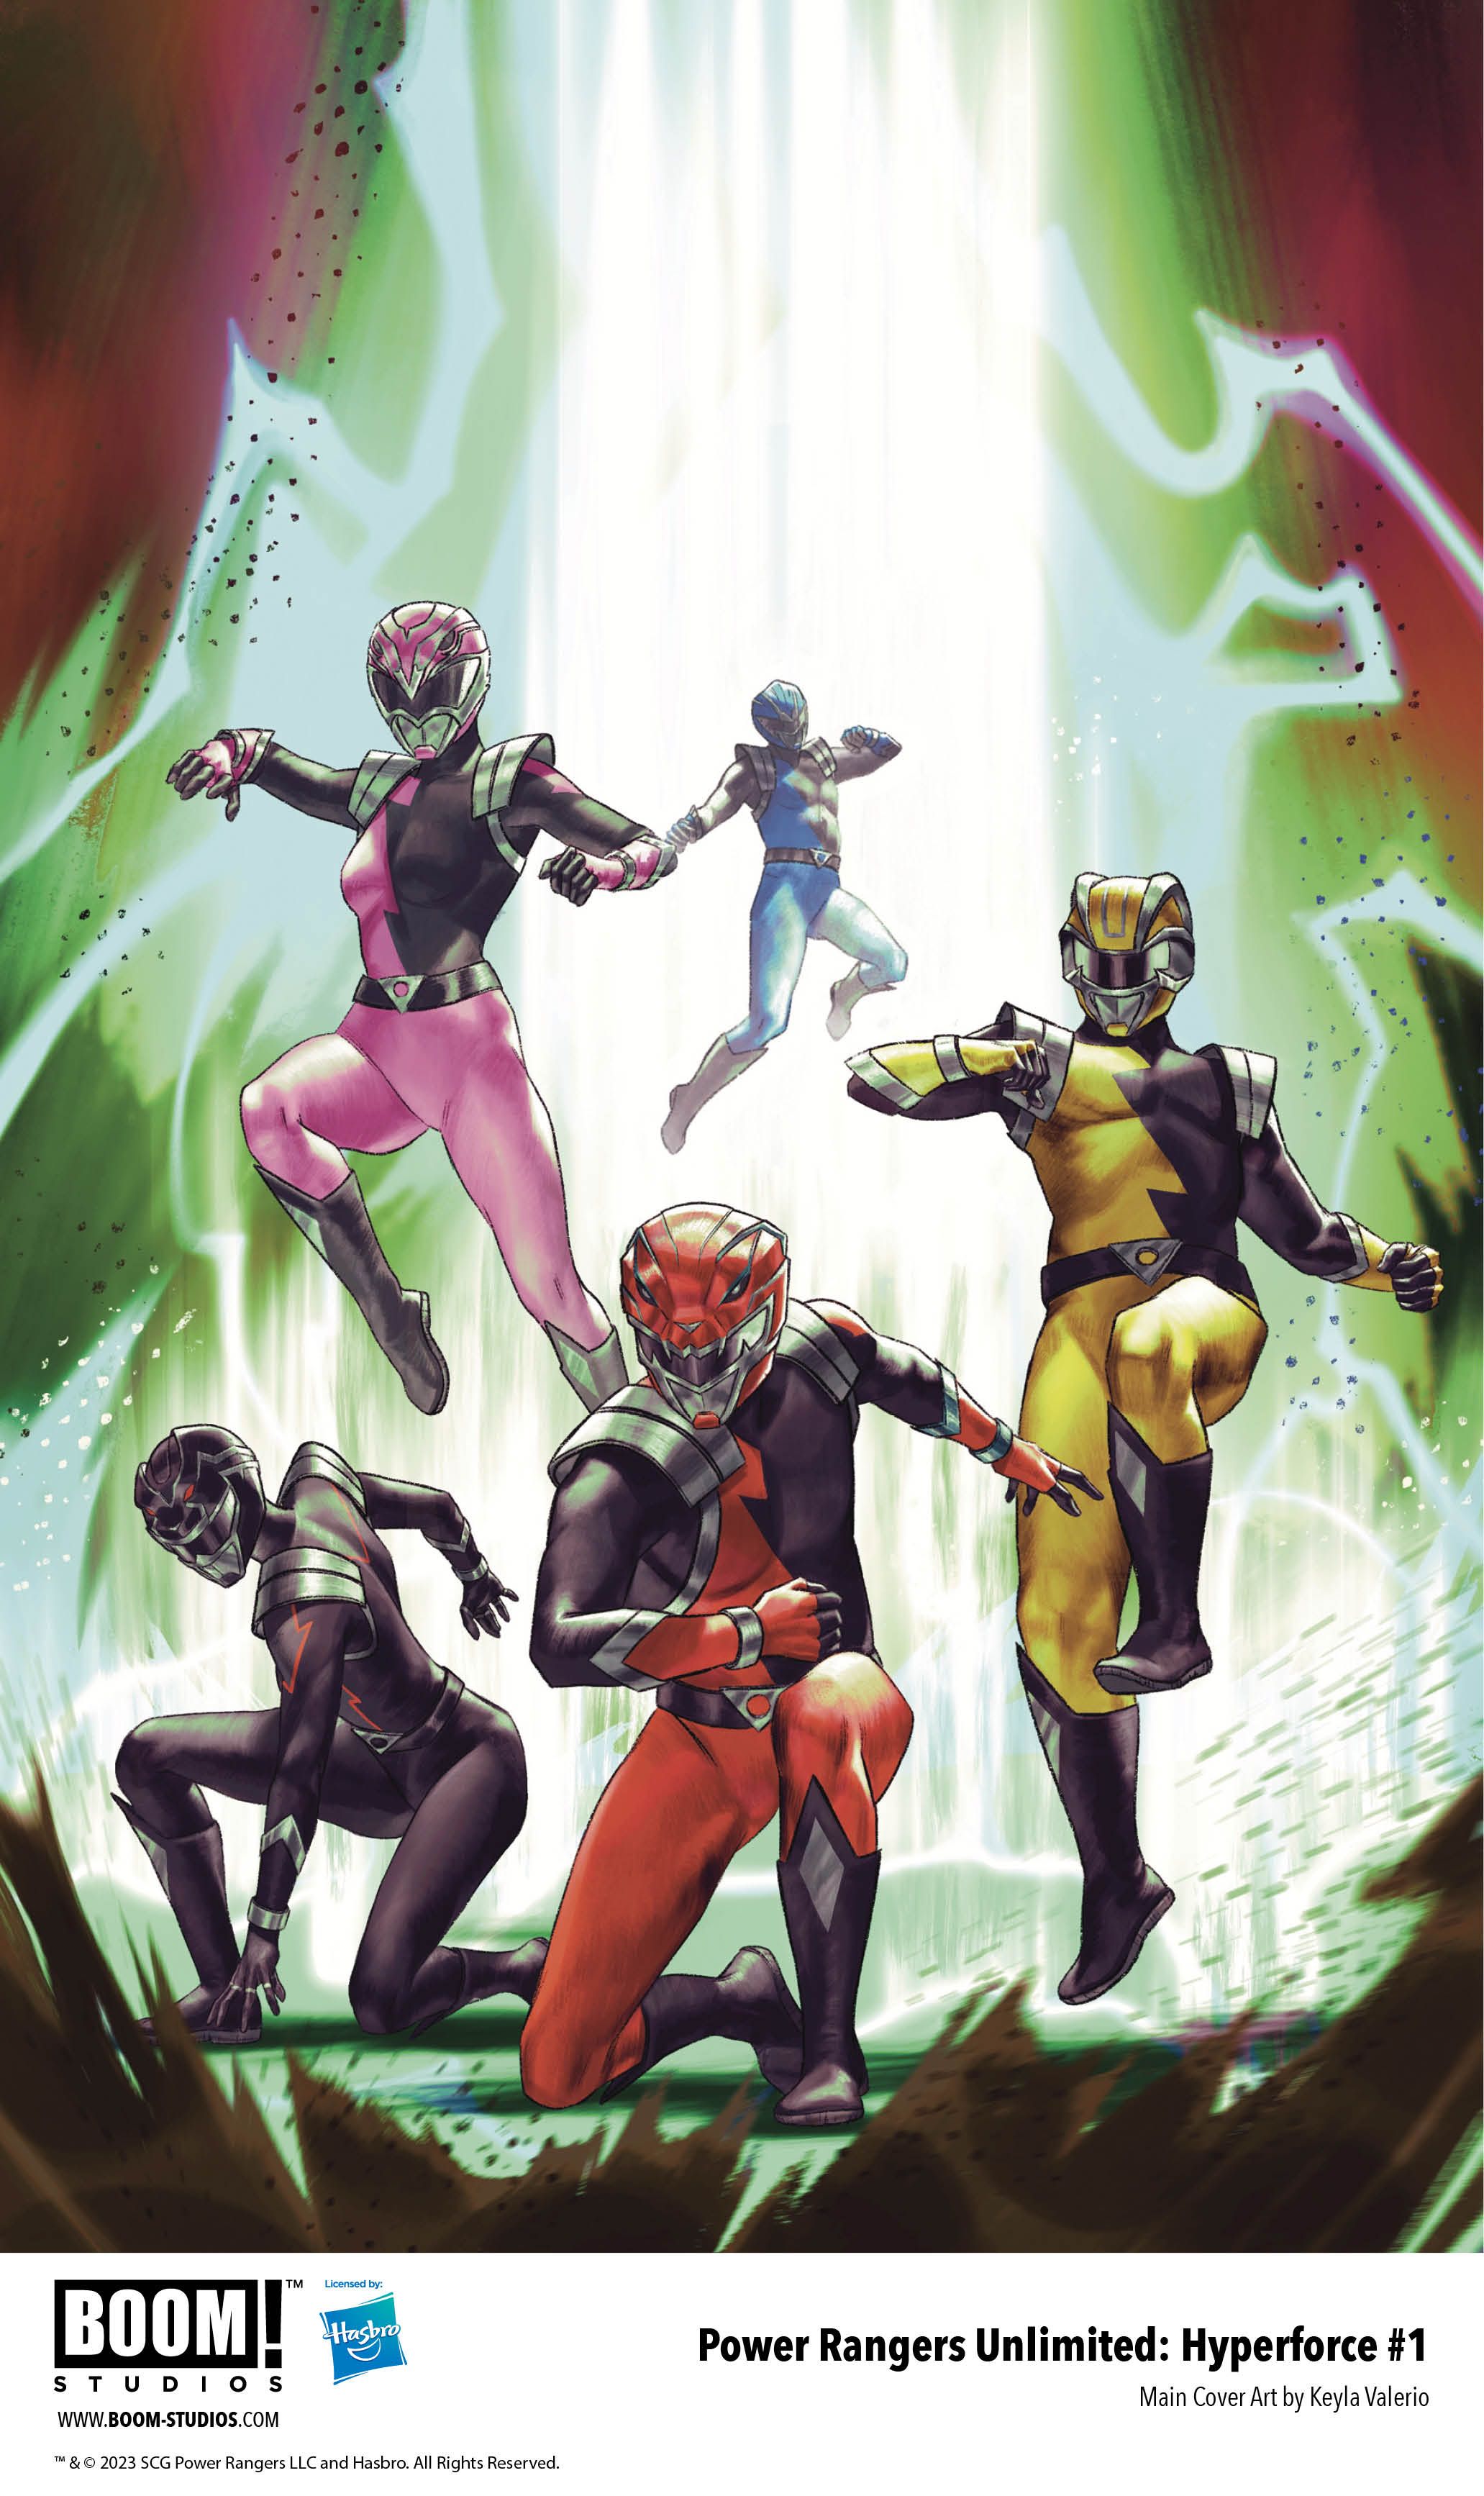 PowerRangers_Unlimited_HyperForce_001_Cover_A_Main_PROMO (1)